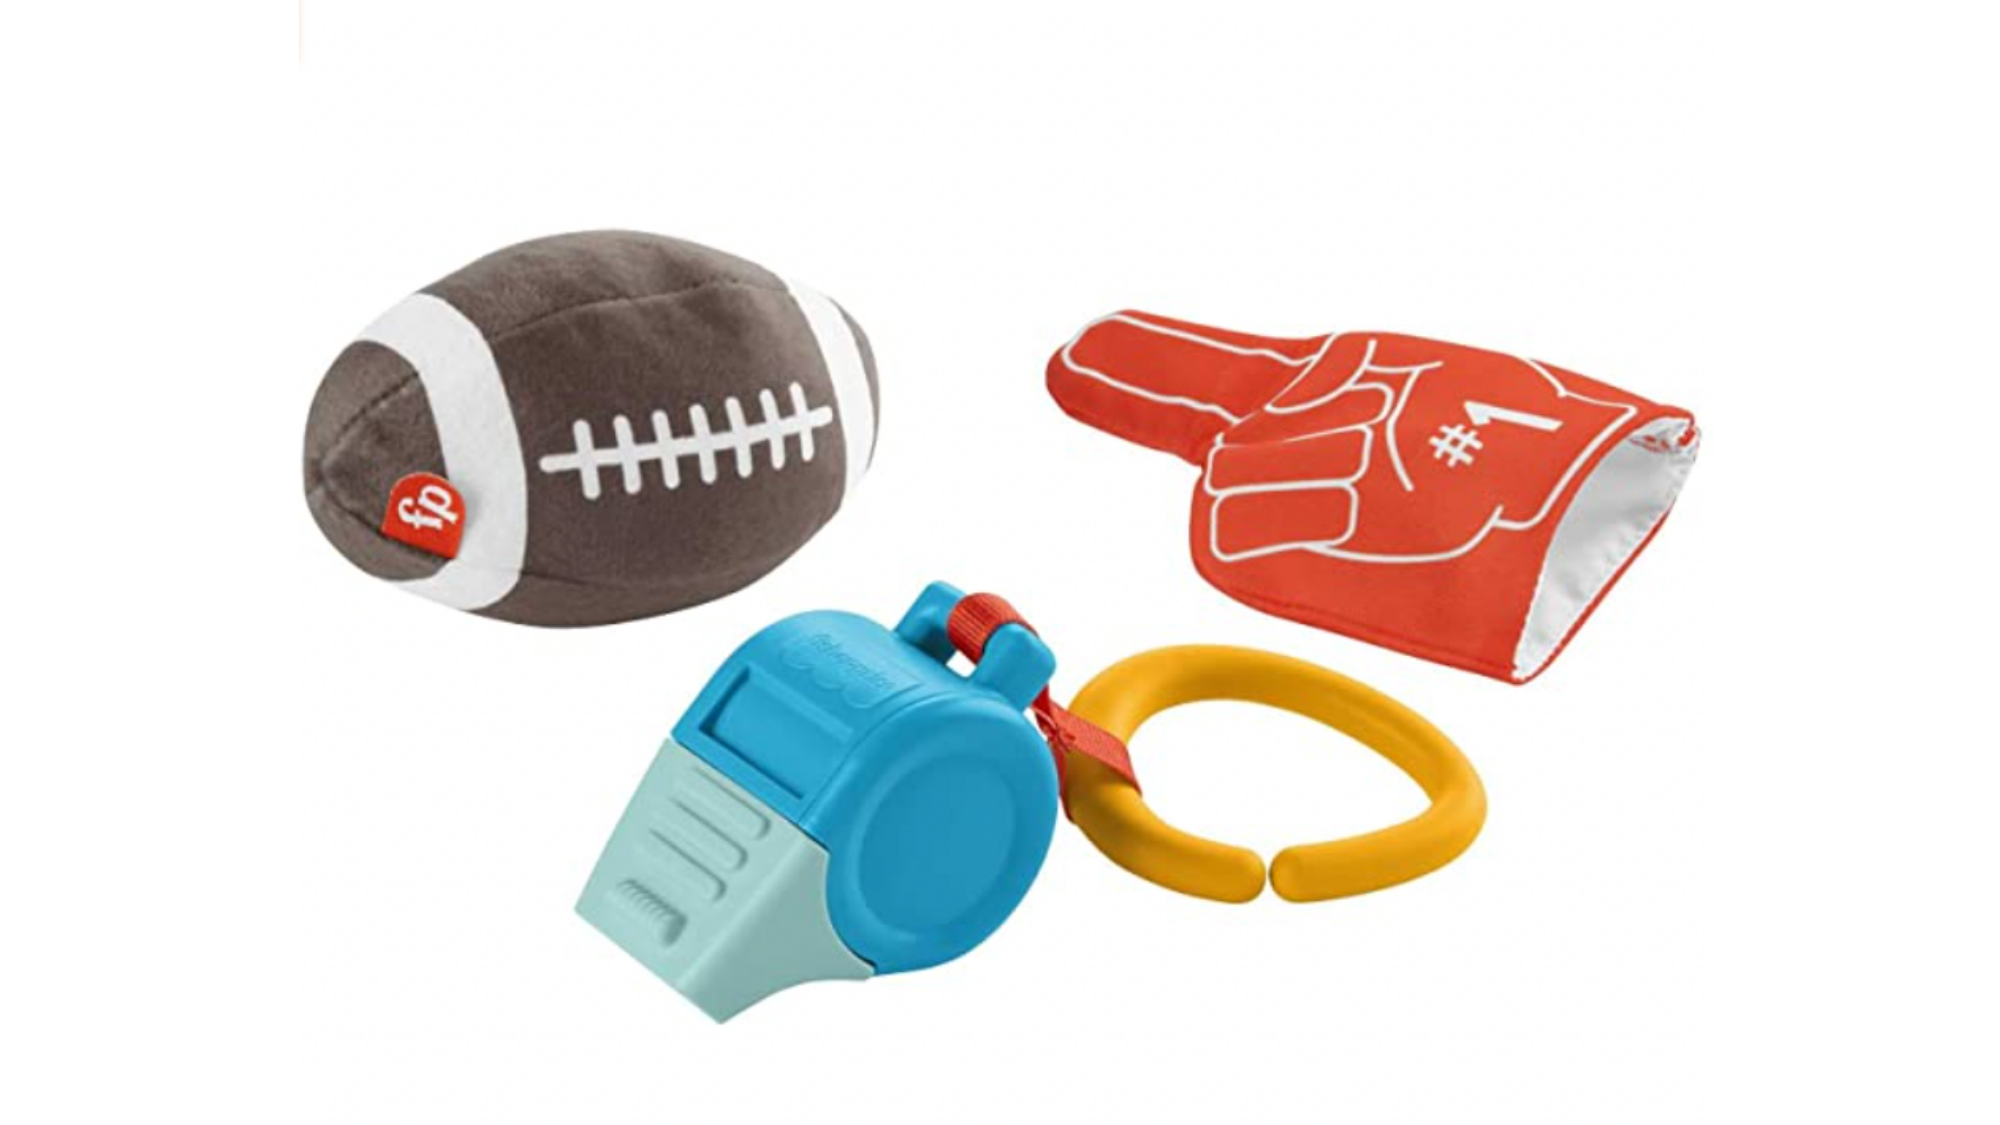 First Super Bowl outfits and toys: A football-themed teething set